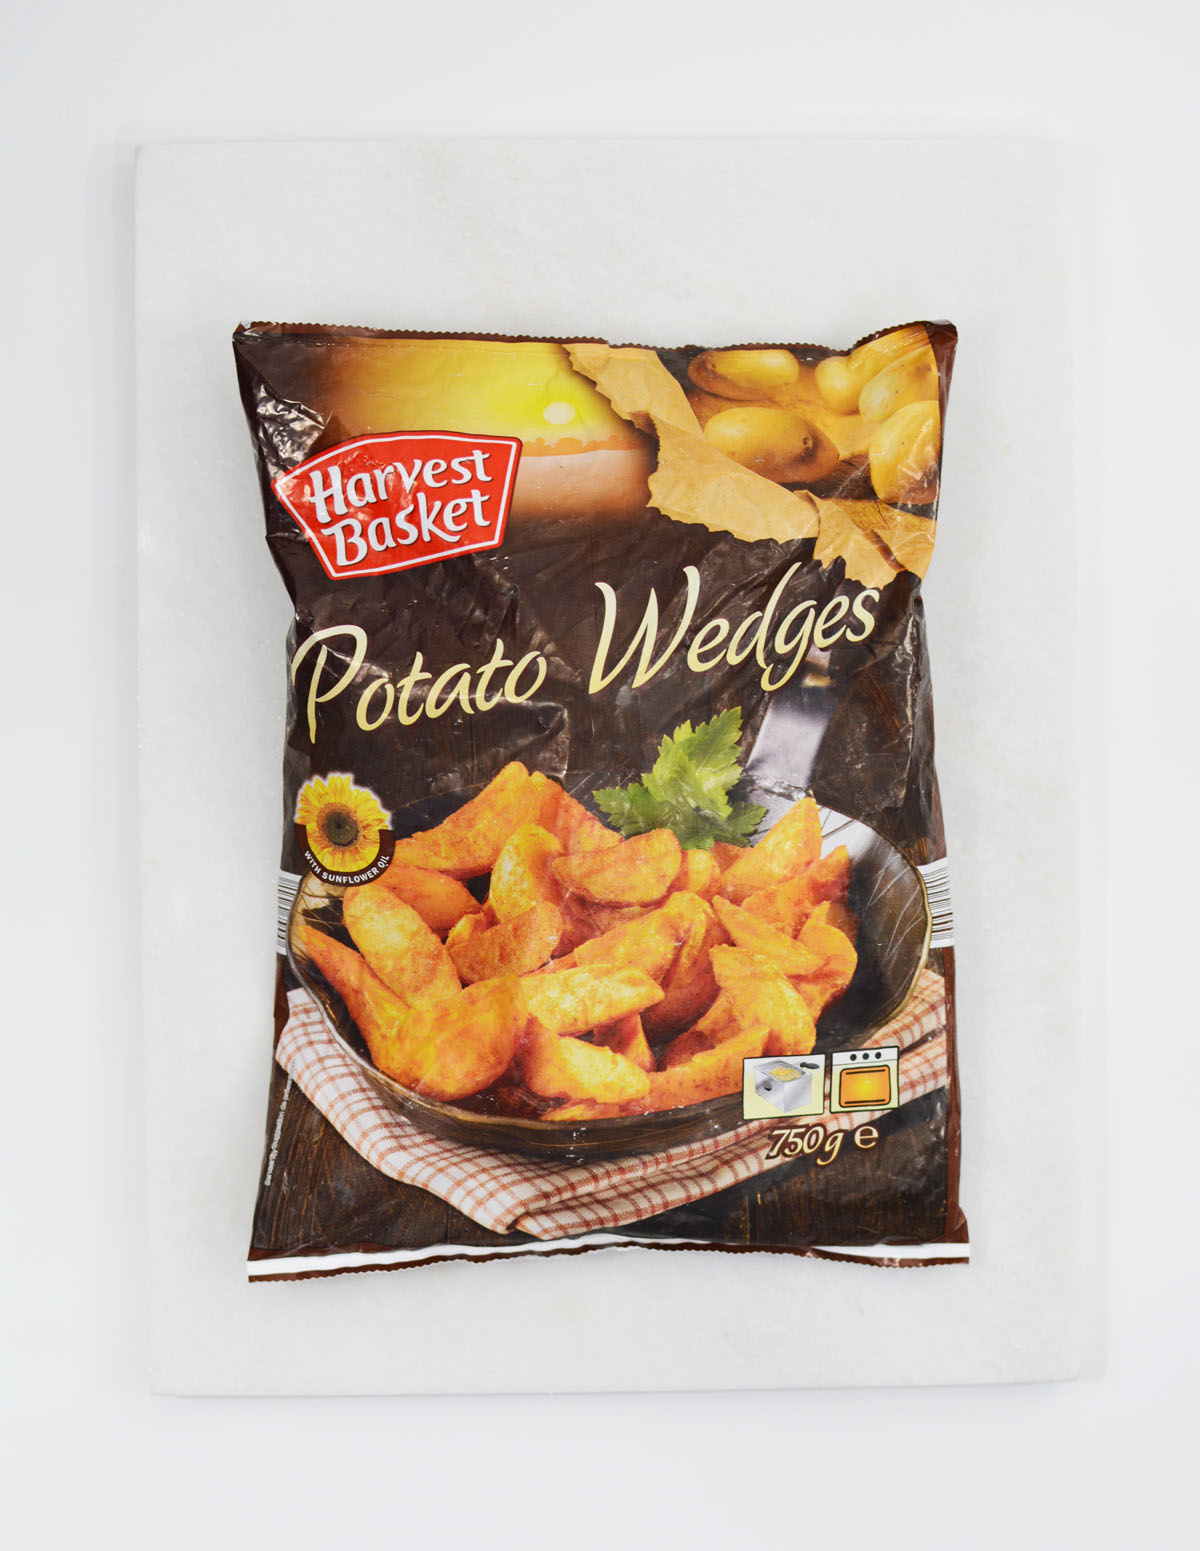 patato-wedges-lidl